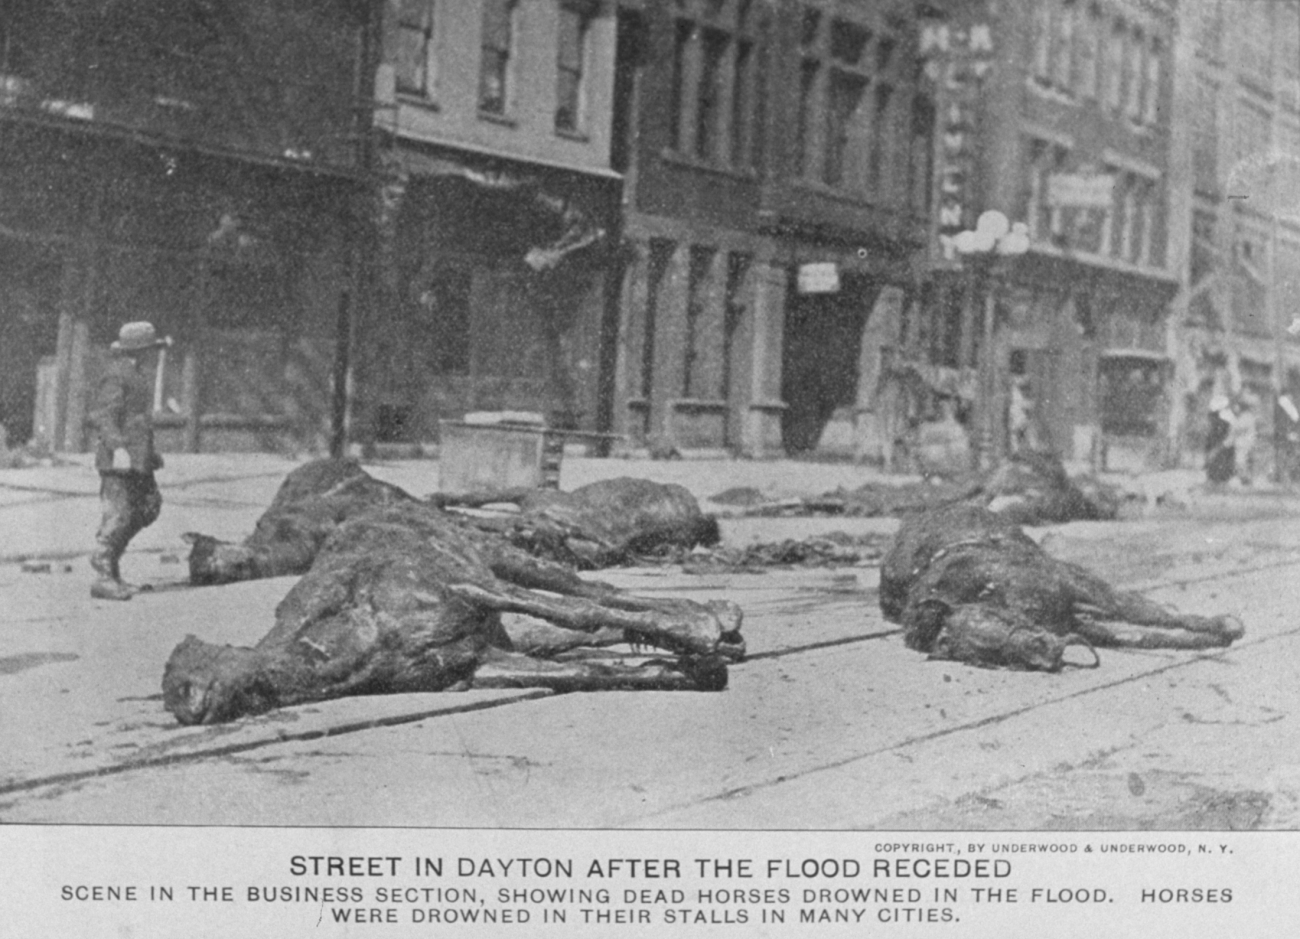 Dead horses litter the streets in Dayton after the flood receded